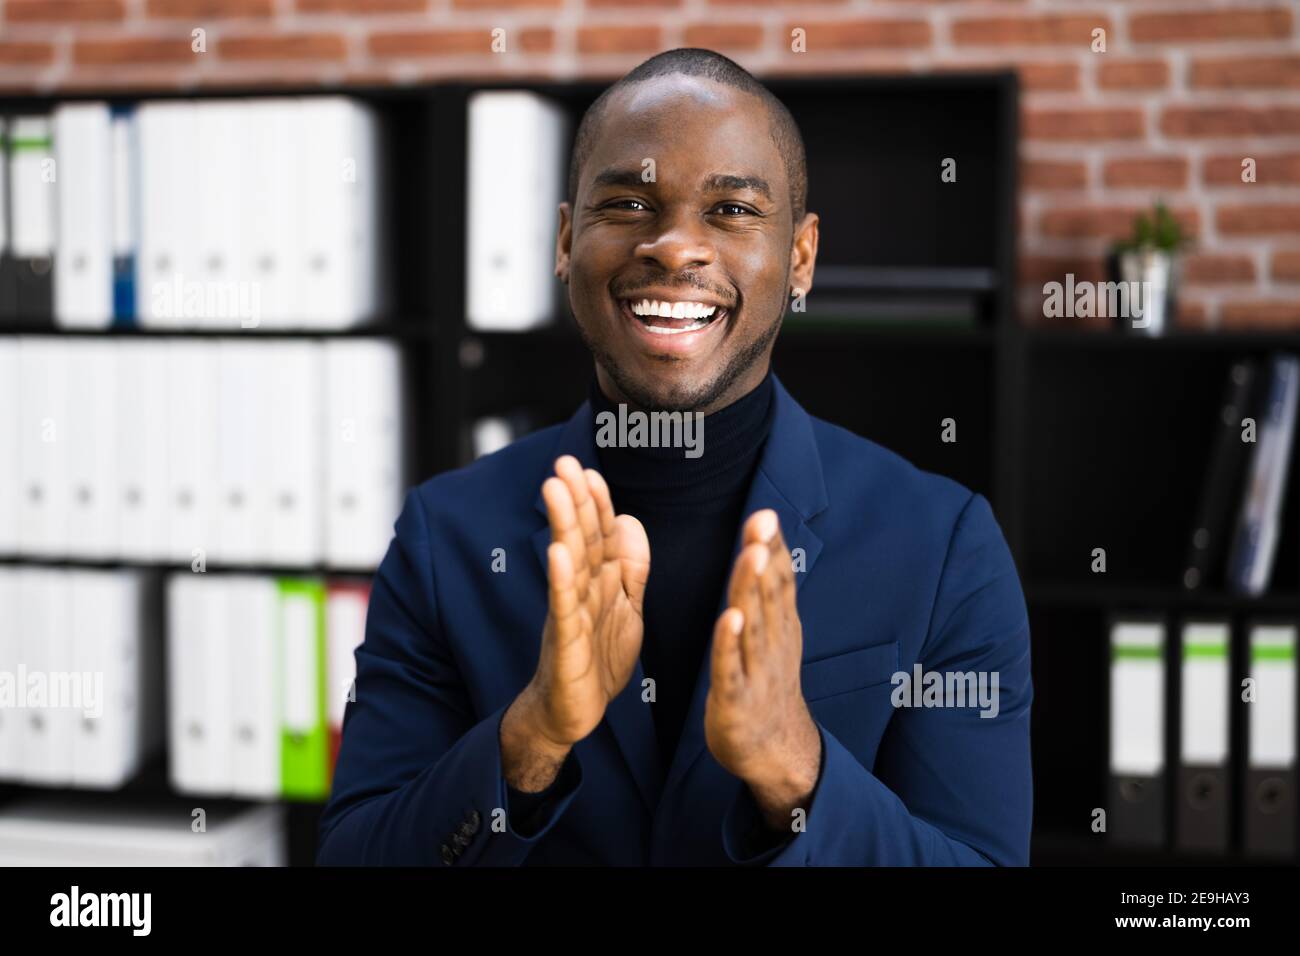 African American Business Man Applauding And Clapping Stock Photo